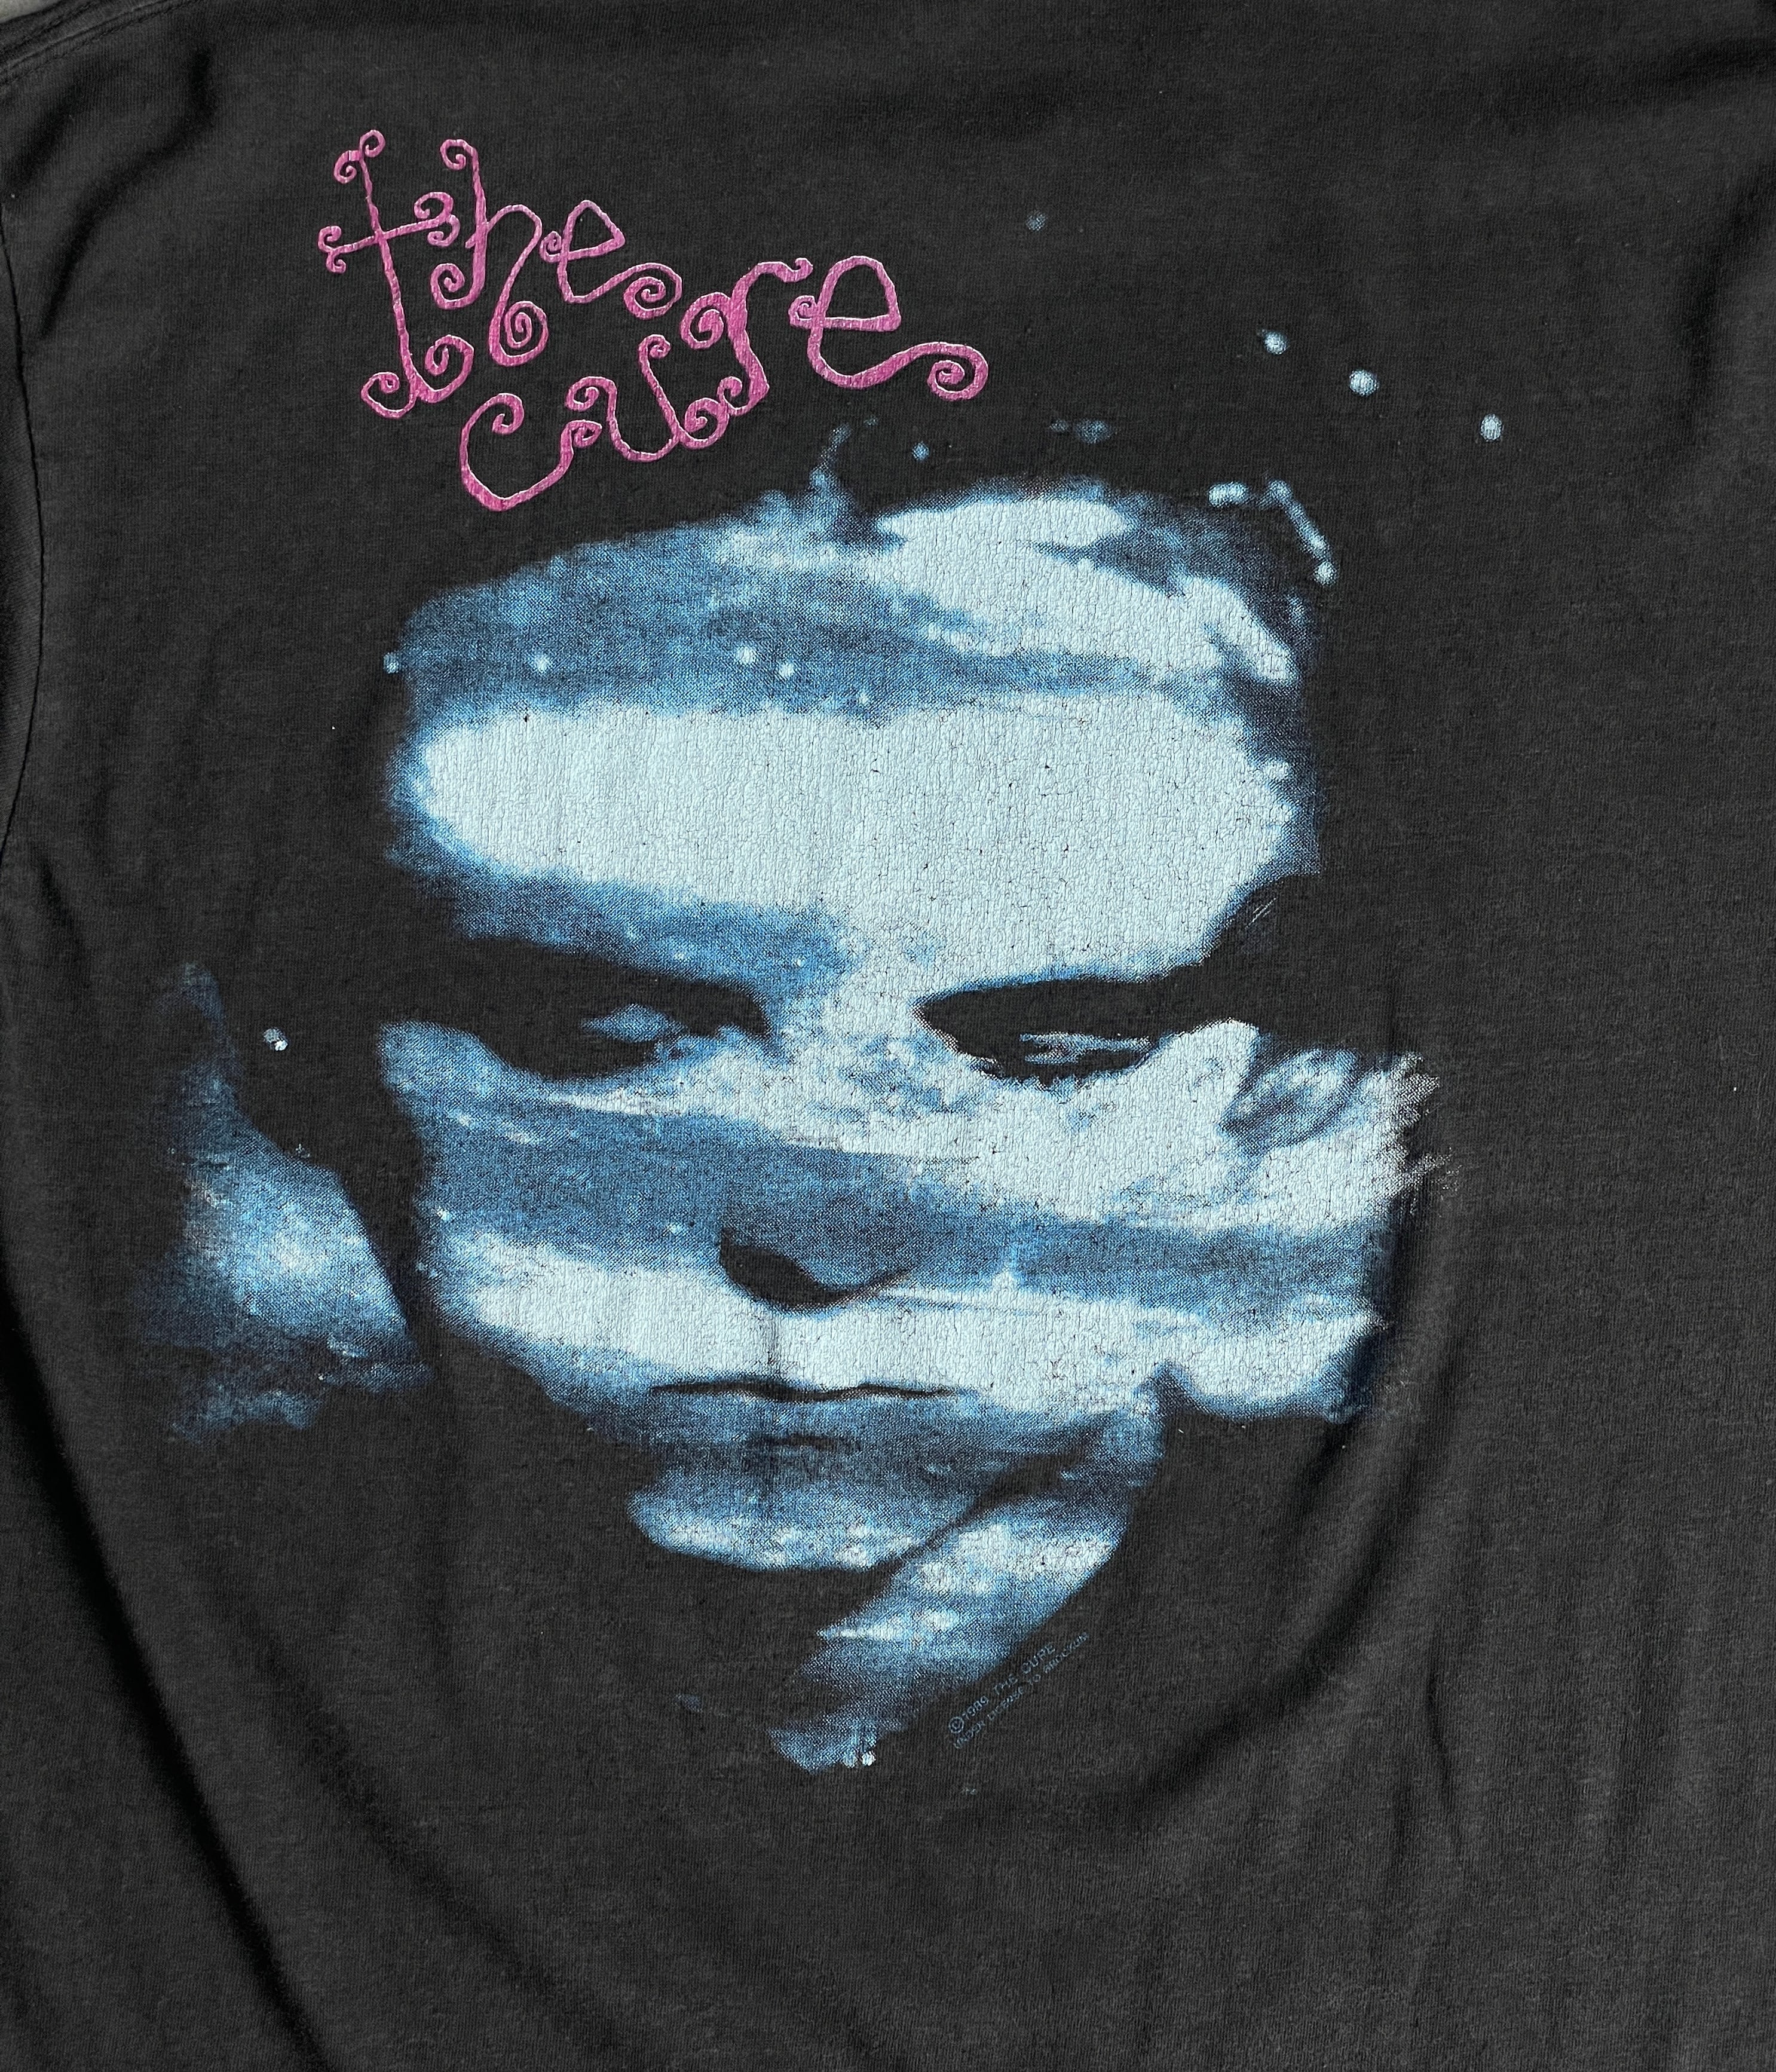 Vintage 80s Rock band T-shirt -The Cure- | BEGGARS BANQUET公式通販サイト 古着・ヴィンテージ